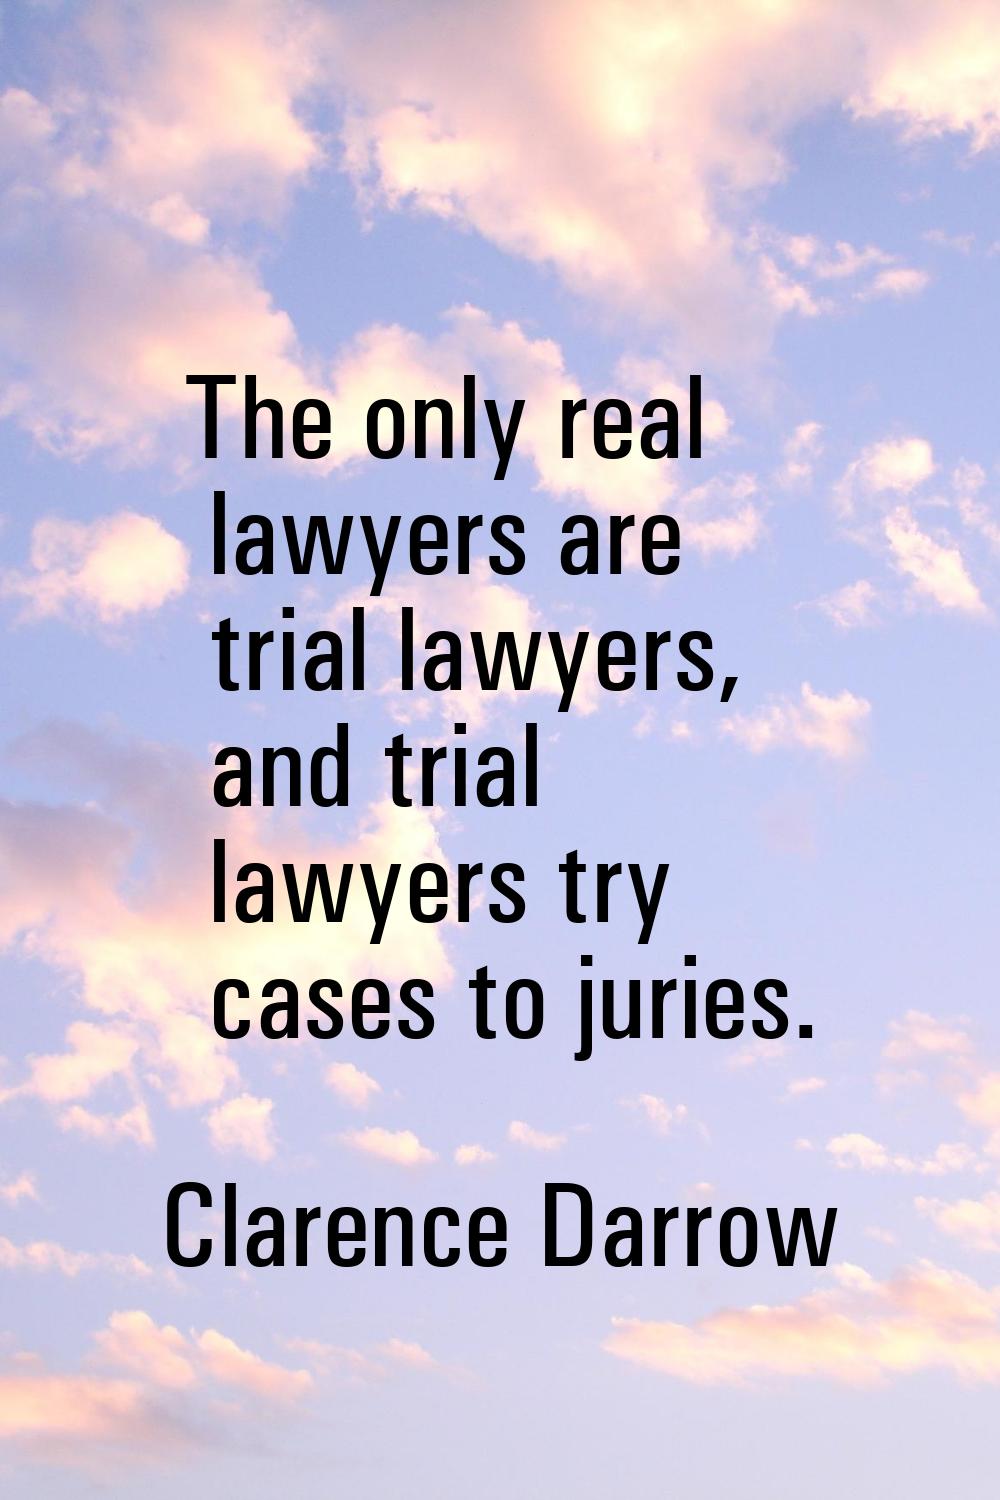 The only real lawyers are trial lawyers, and trial lawyers try cases to juries.